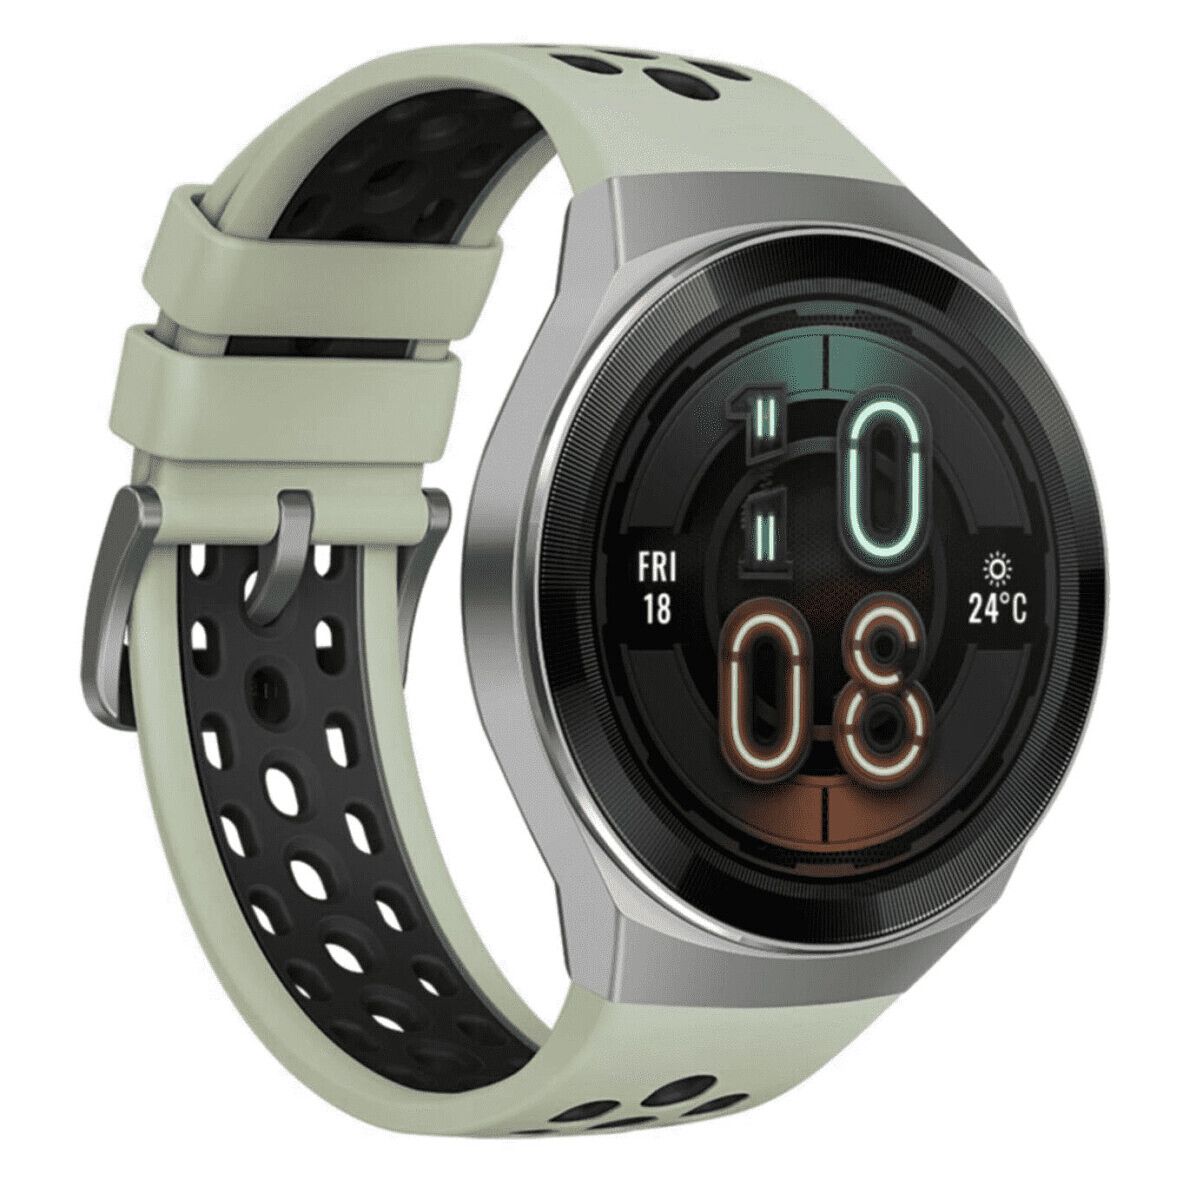 The Huawei Watch GT2e is a pretty great smartwatch, and despite some limitations to the smartwatch functionality in LiteOS, it remains one of the best fitness trackers you can buy. It excels when it comes to fitness, and it definitely smokes the likes of Fitbit in terms of value for money. It's not the cheapest <em>fitness tracker</em> out there, but it's also not the most expensive <em>smartwatch.</em>